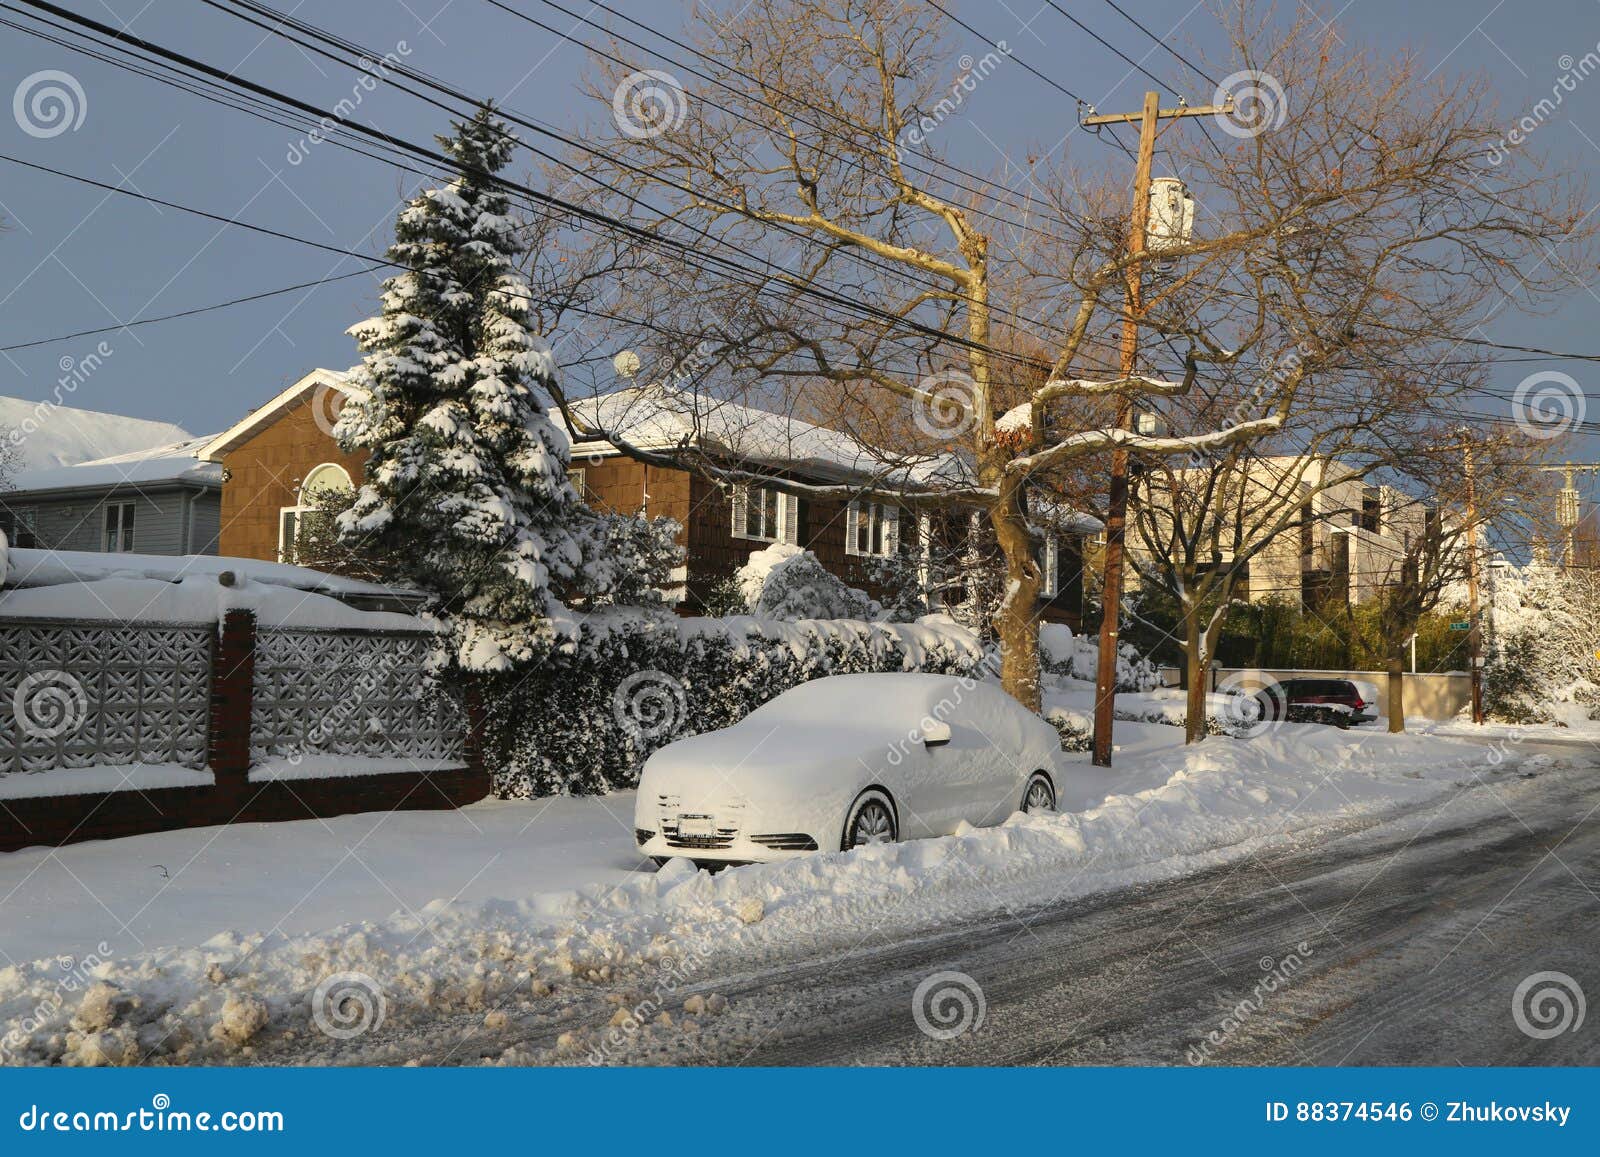 Car Under Snow in Brooklyn after Massive Winter Storm Editorial Photo -  Image of brooklyn, driver: 88374546